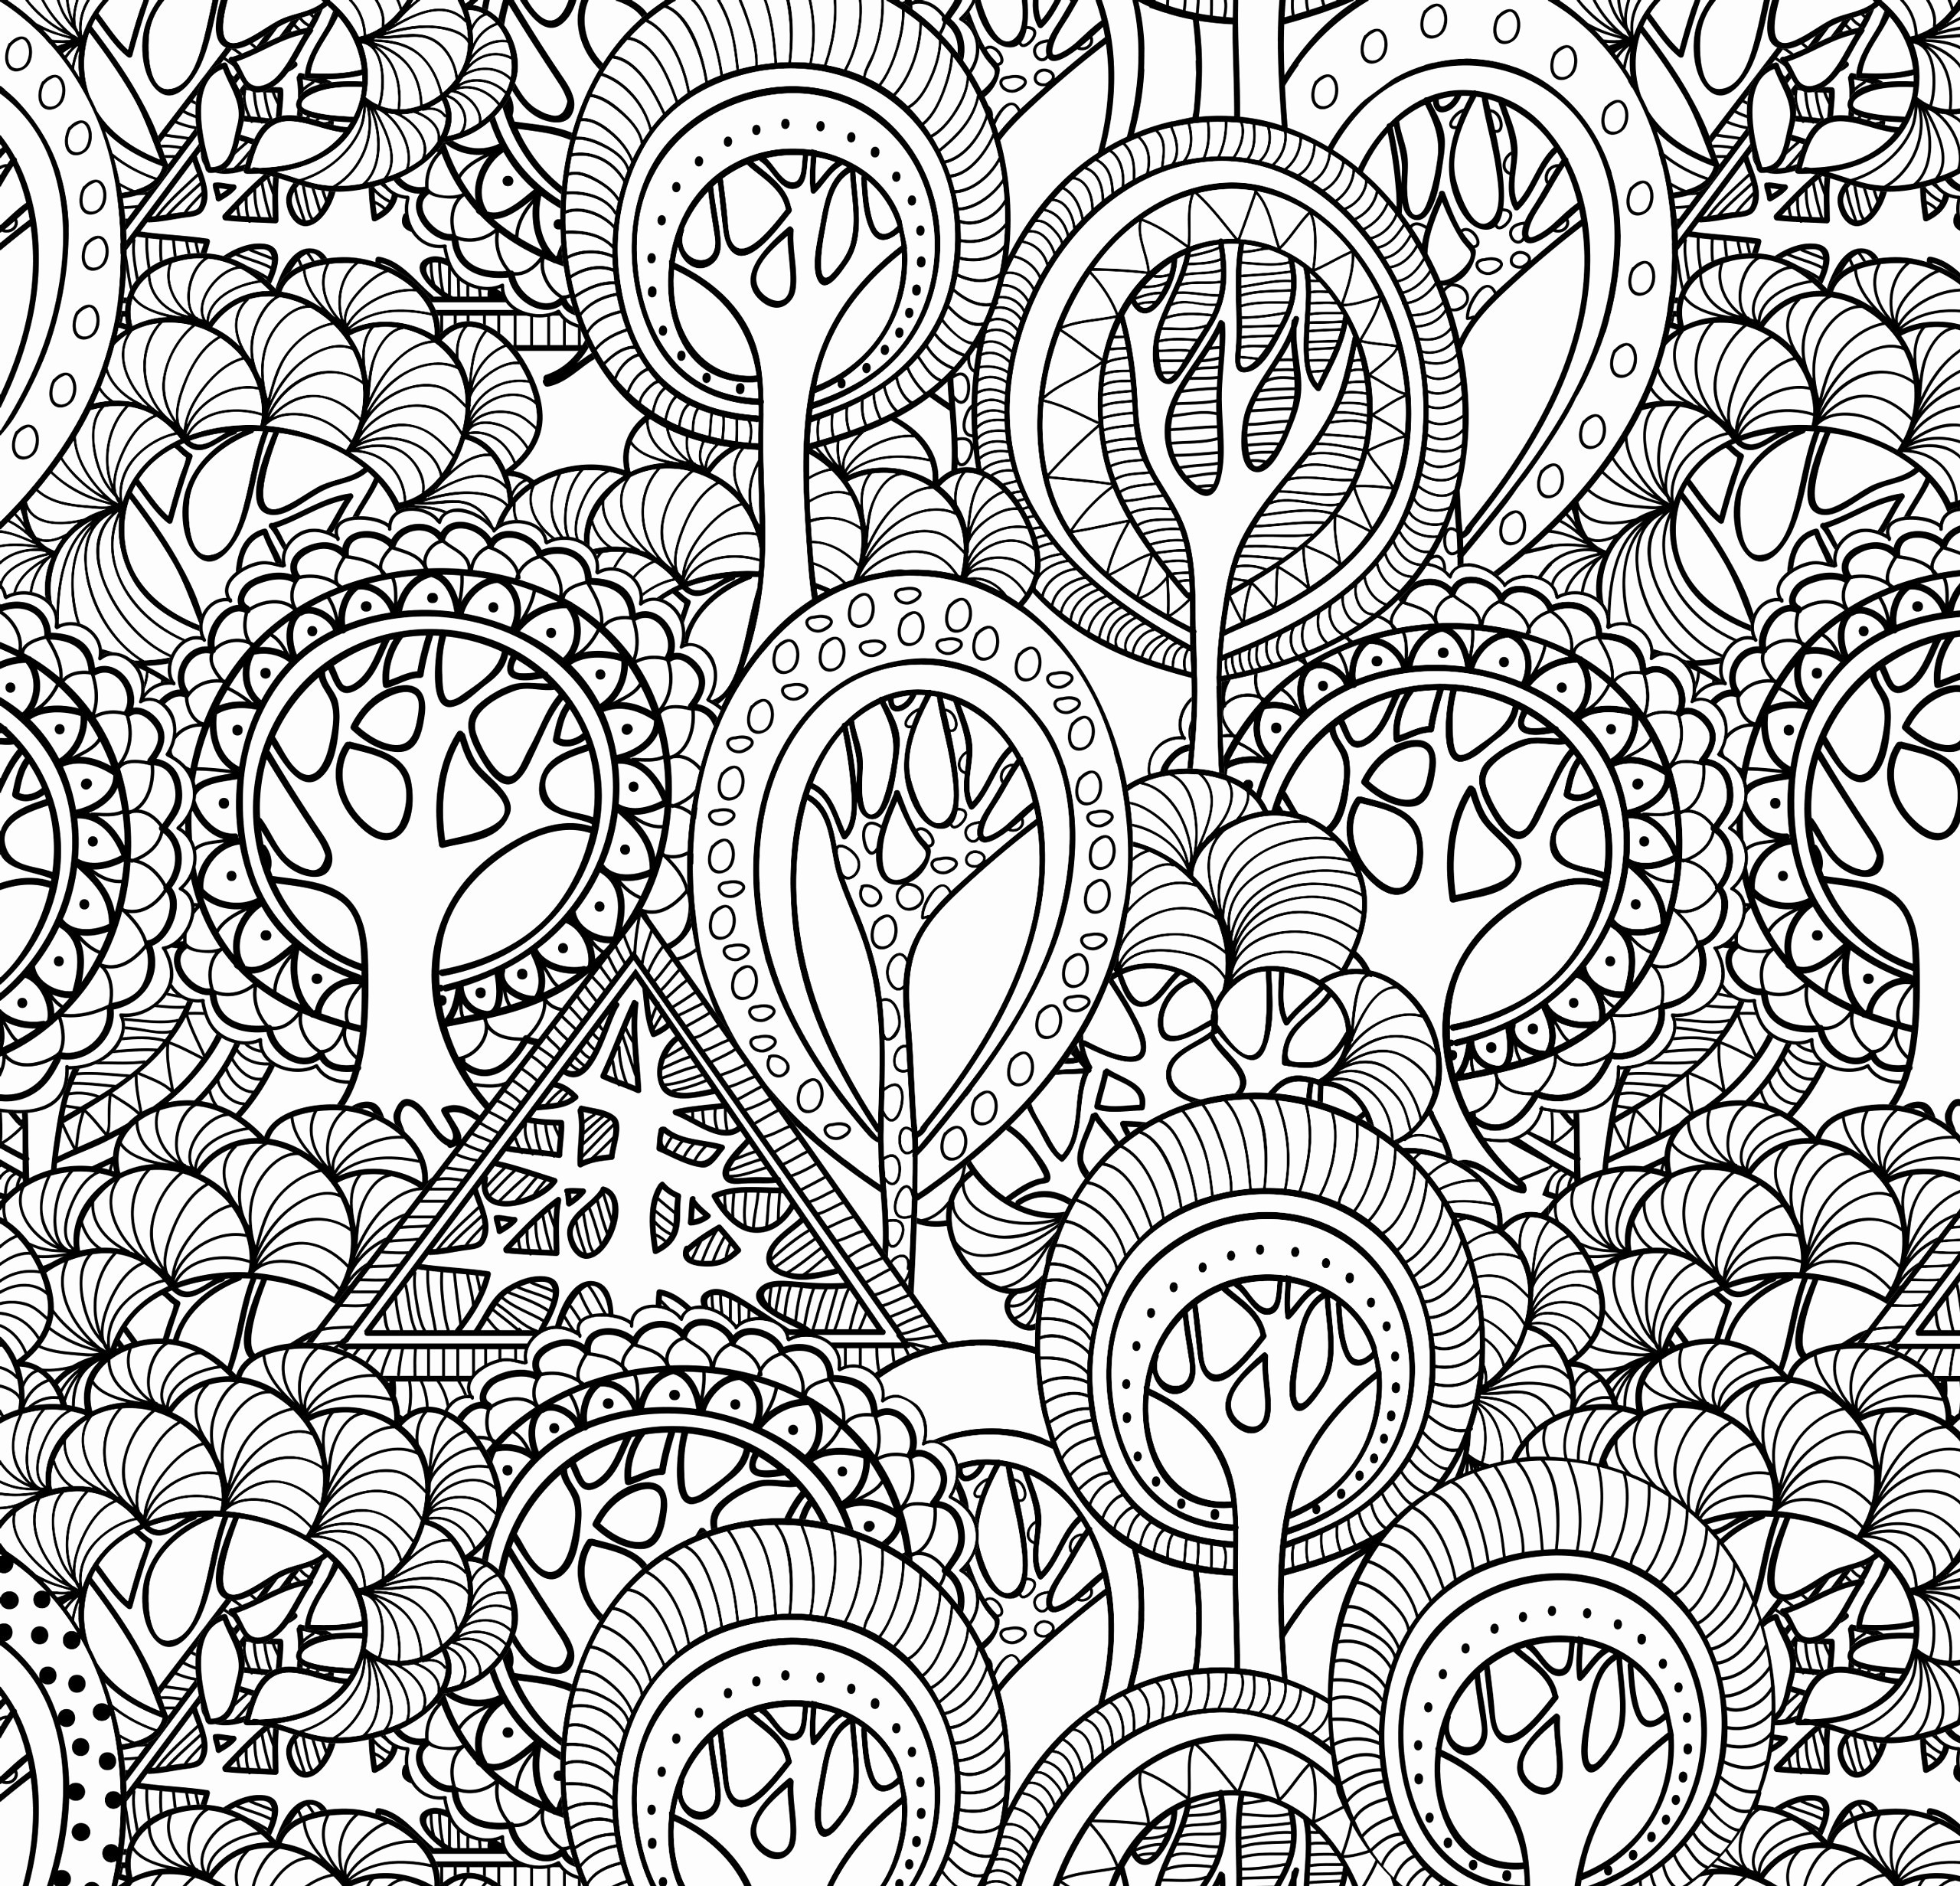 29 Famous Black and White Flower Vase 2024 free download black and white flower vase of popular coloring pages best of cool vases flower vase coloring page with cool vases flower vase coloring page pages flowers in a top i 0d